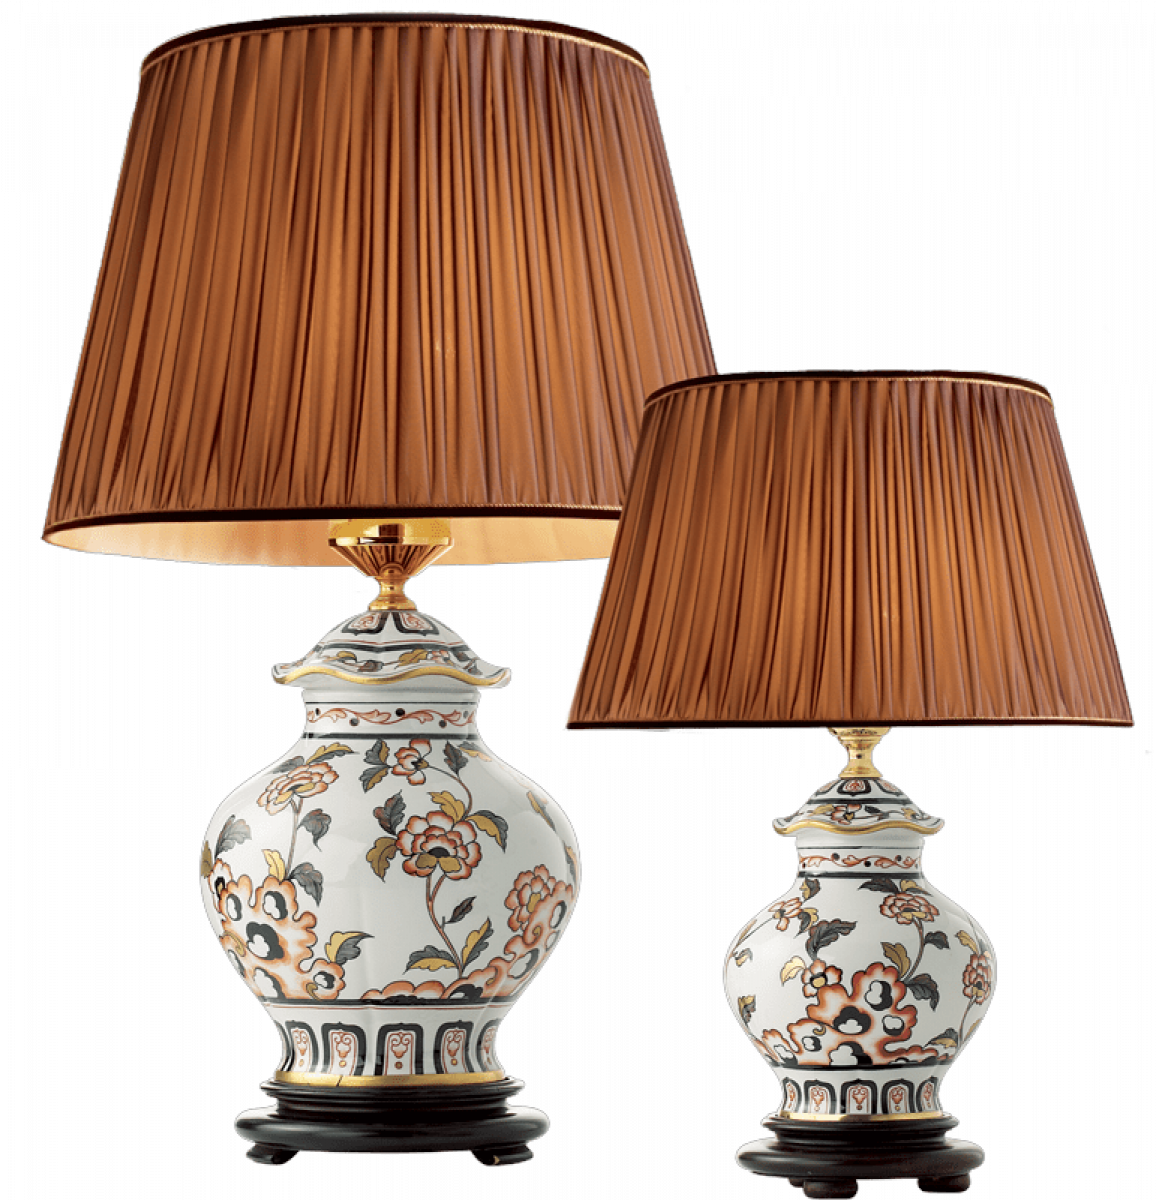 TABLE LAMP 2447